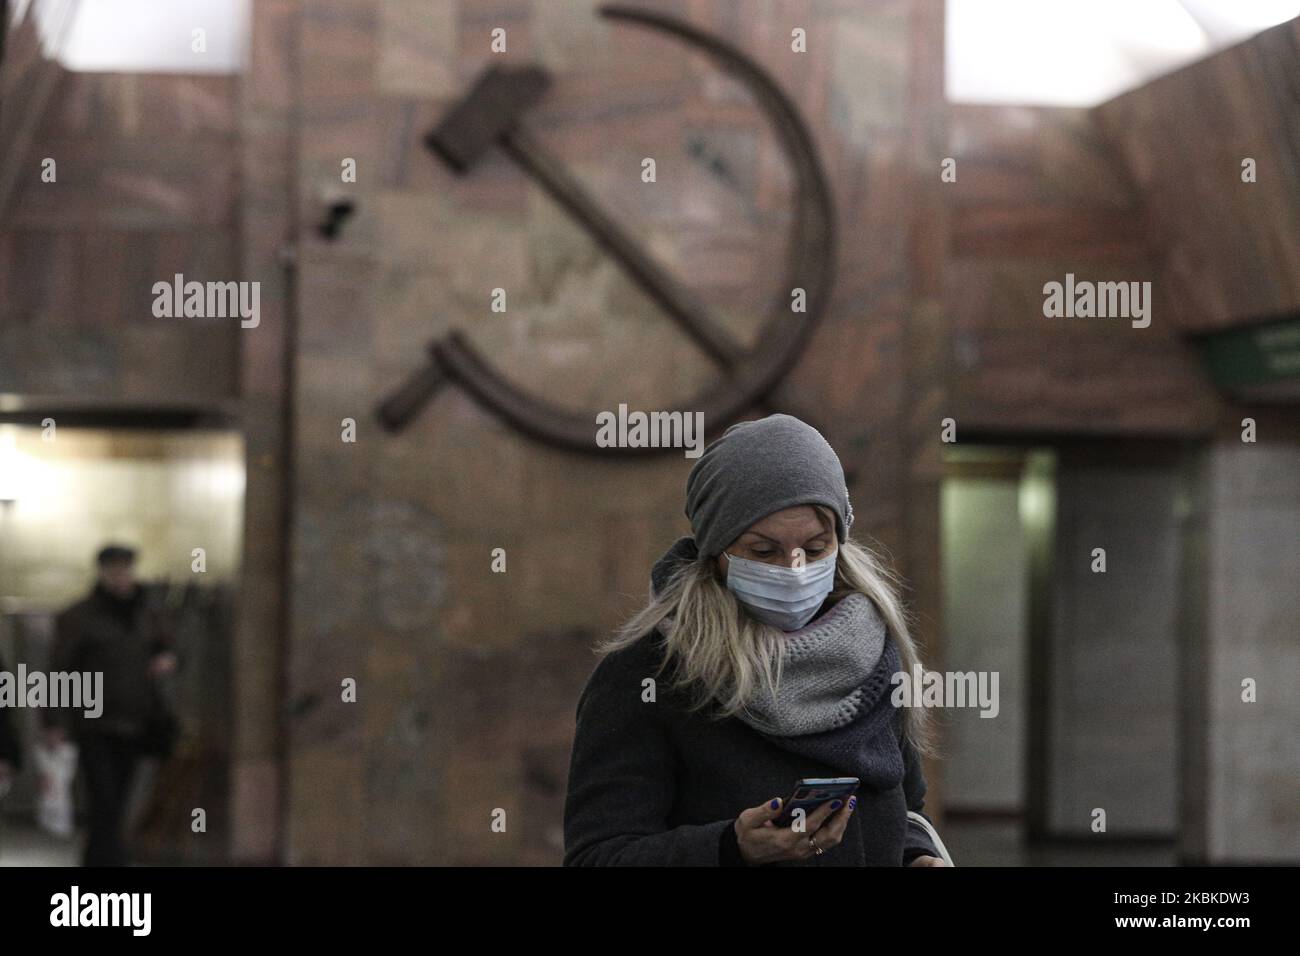 A woman in a protective mask walks near the symbol of the Soviet Union (hammer and sickle) at the Proletarskaya station. due to the coronavirus outbreak, the number of metro users has decreased by 25 percent. Saint Petersburg, Russia. March 23, 2020 (Photo by Valya Egorshin/NurPhoto) Stock Photo